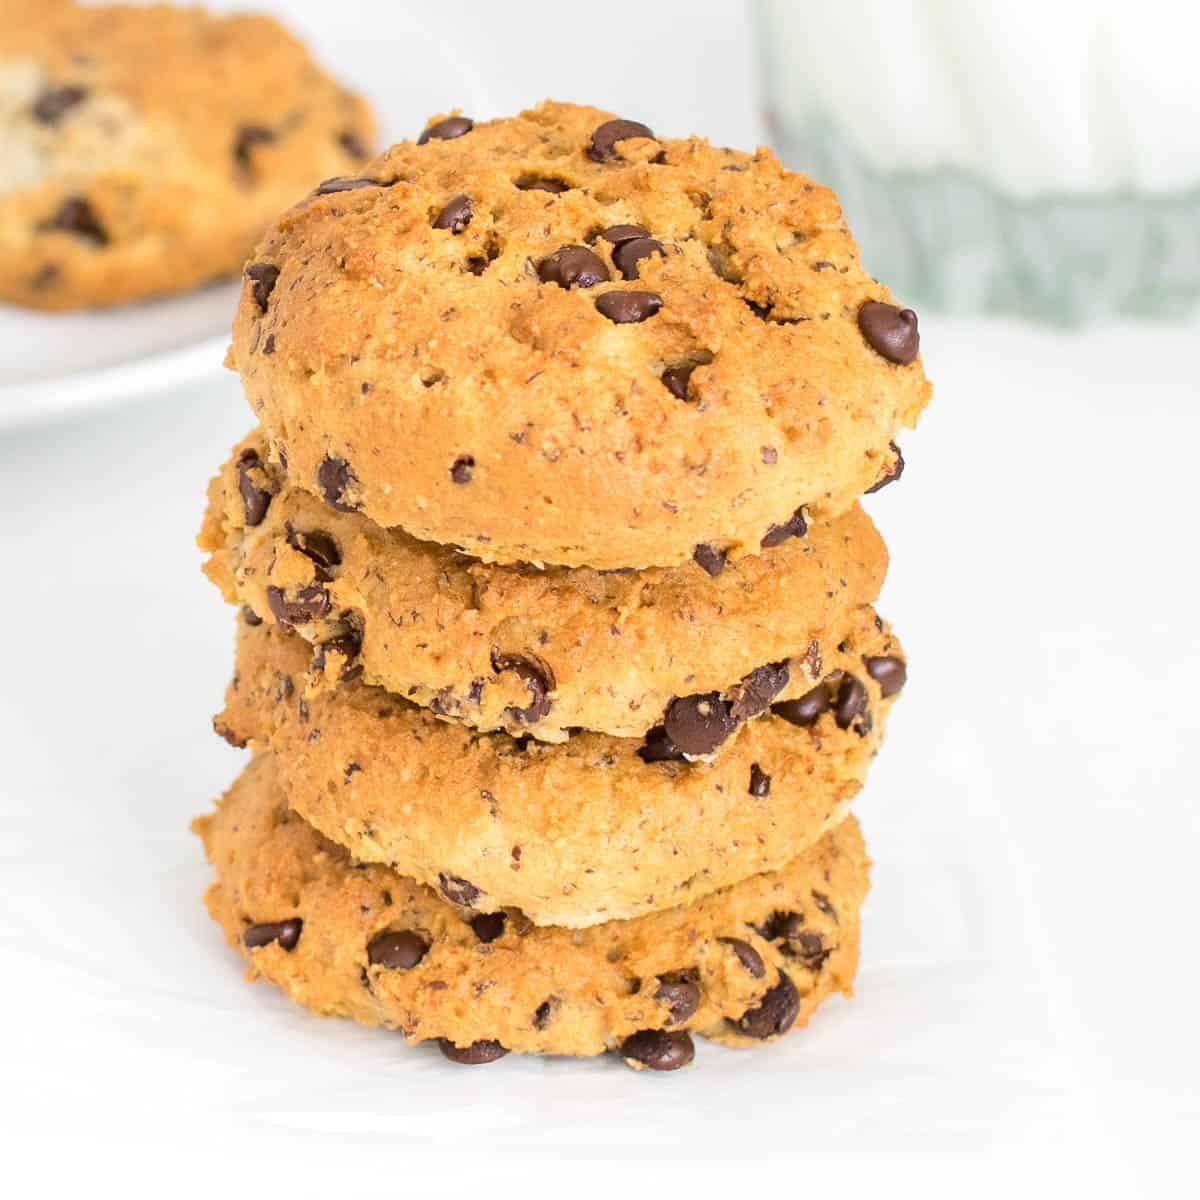 Stack of four chocolate chip cookies